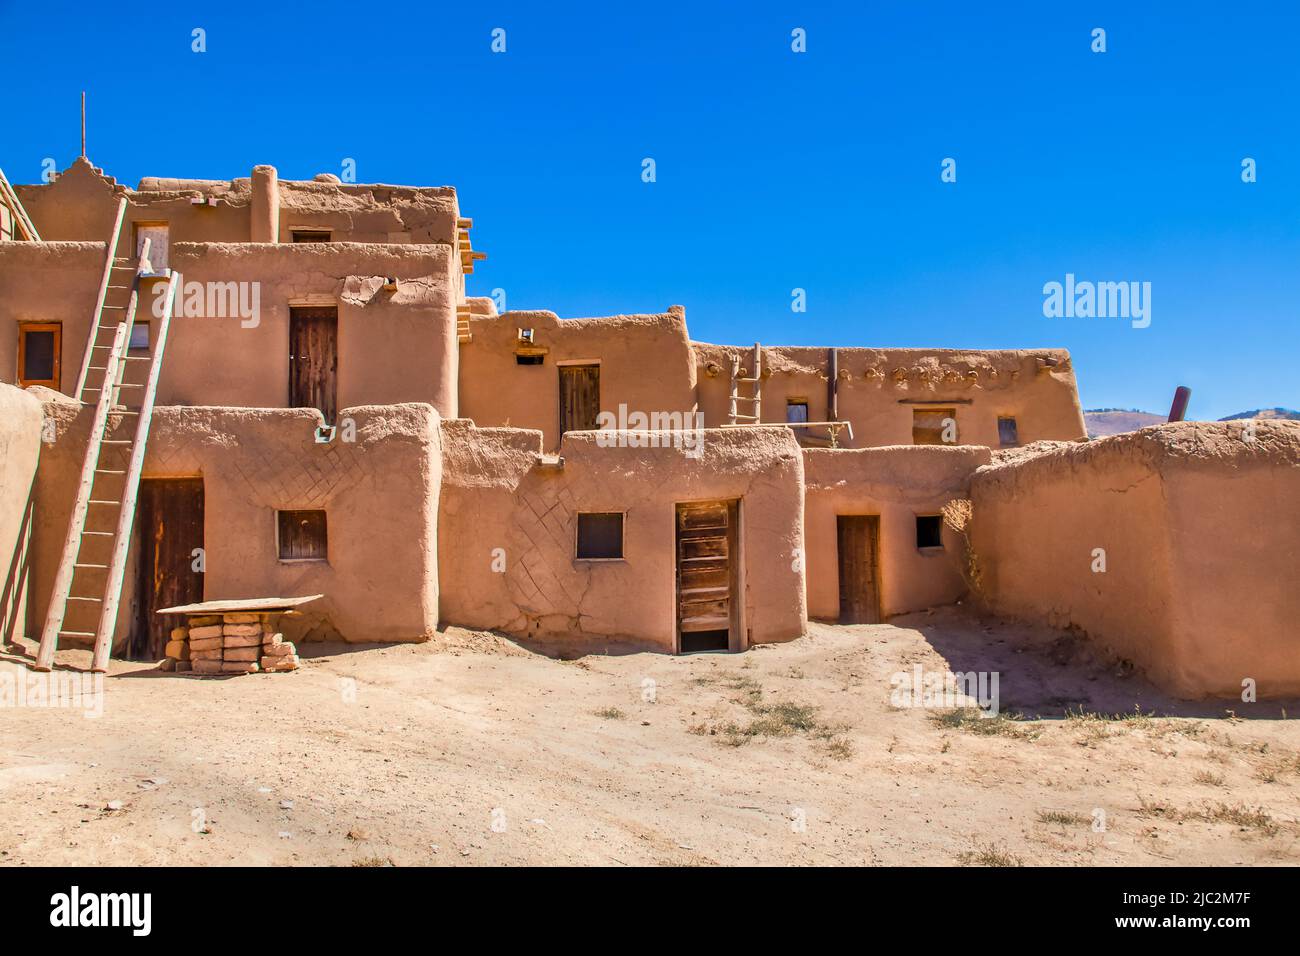 Multi-story adobe buildings from Taos Pueblo in New Mexico where Indigenous people are still living after over a thousand years Stock Photo